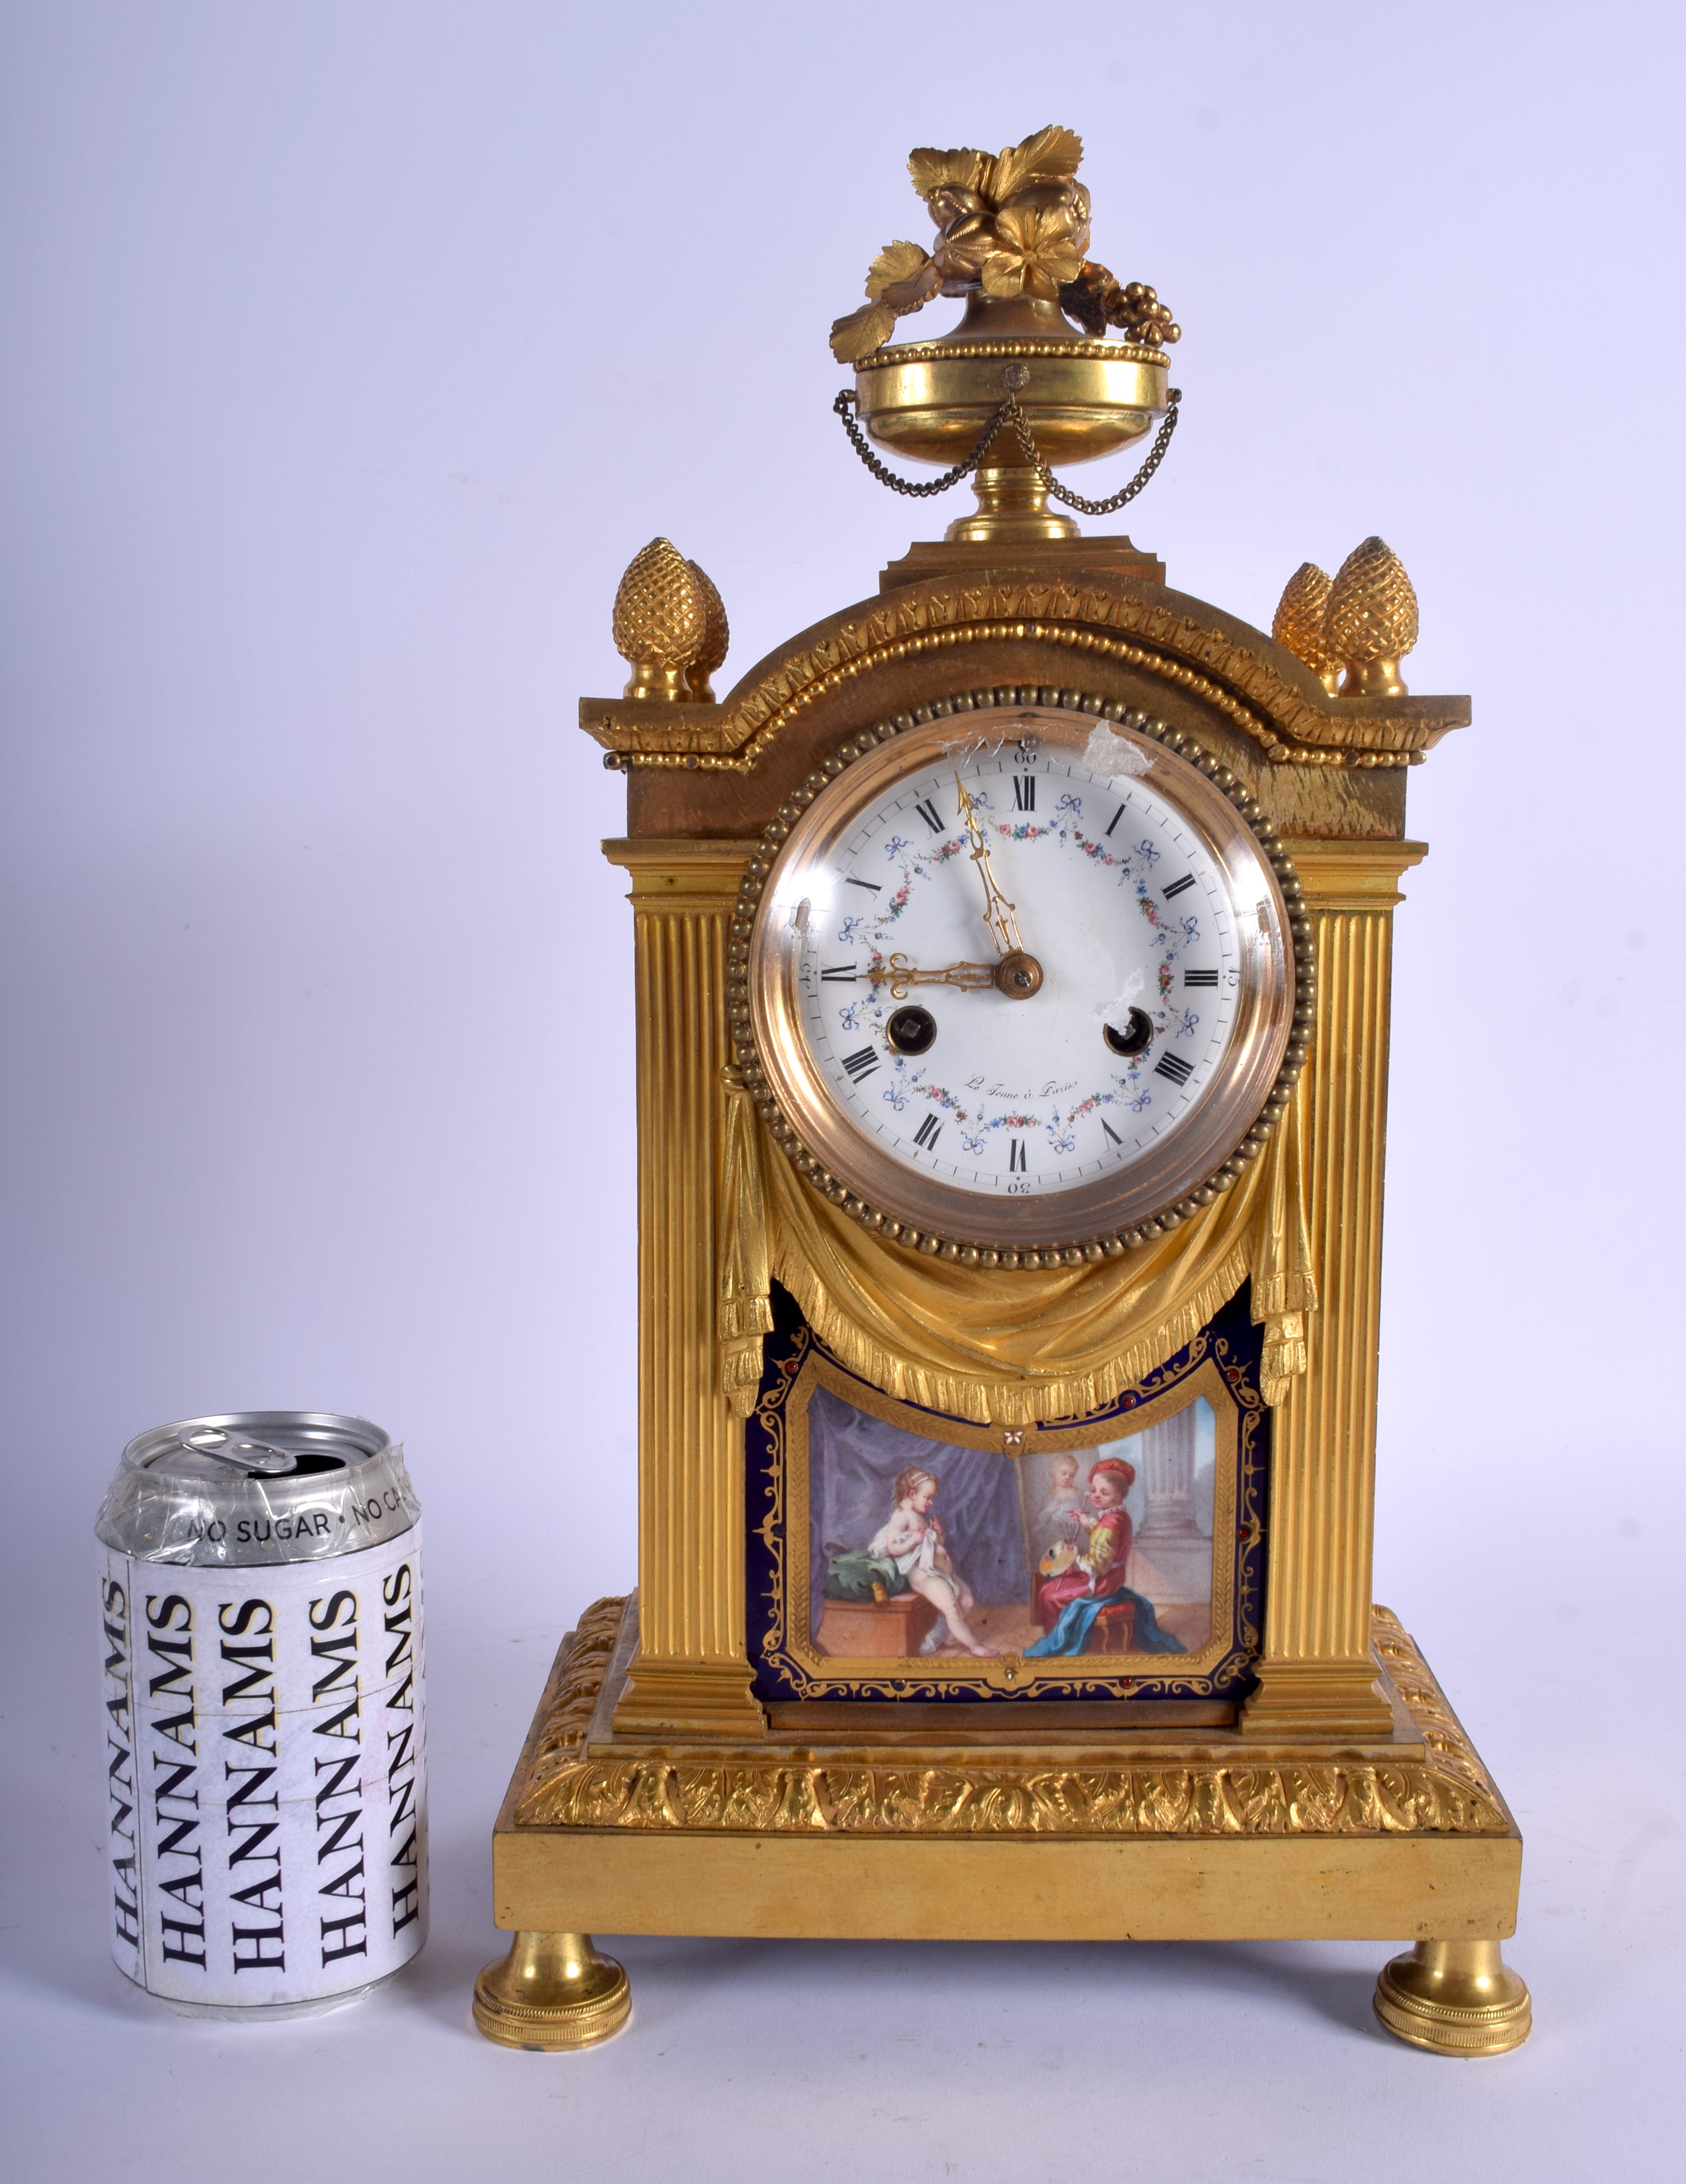 A LARGE 19TH CENTURY FRENCH SEVRES PORCELAIN AND ORMOLU MANTEL CLOCK painted with figures. 39 cm x 1